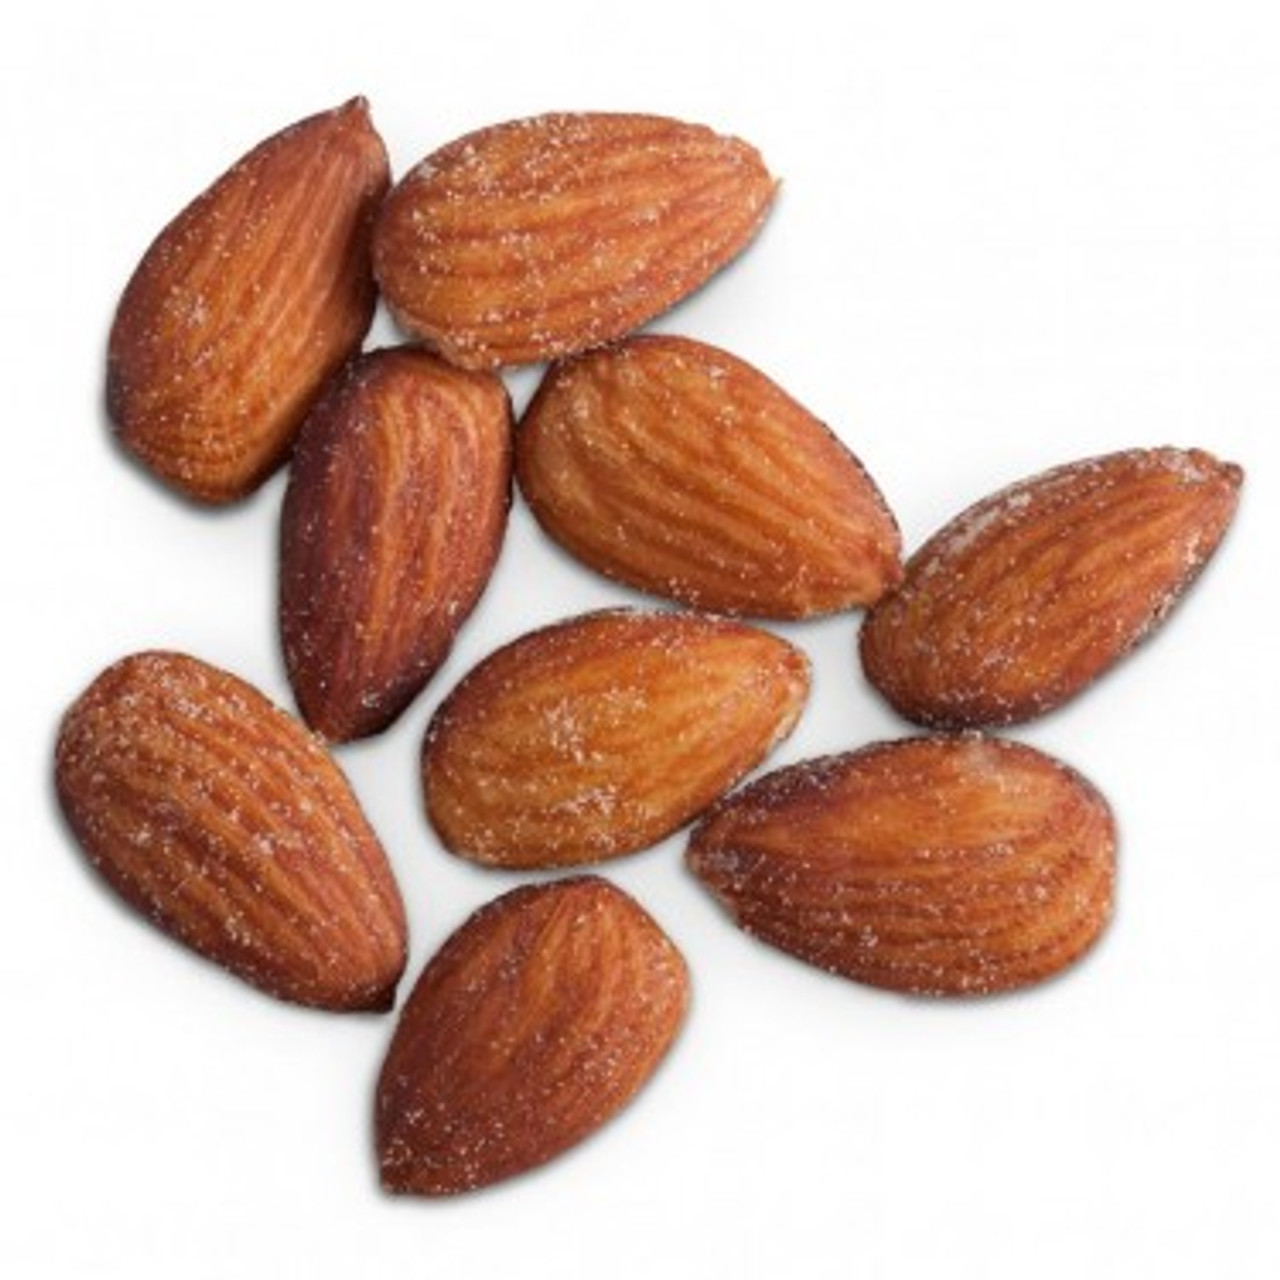 Almonds & Nuts